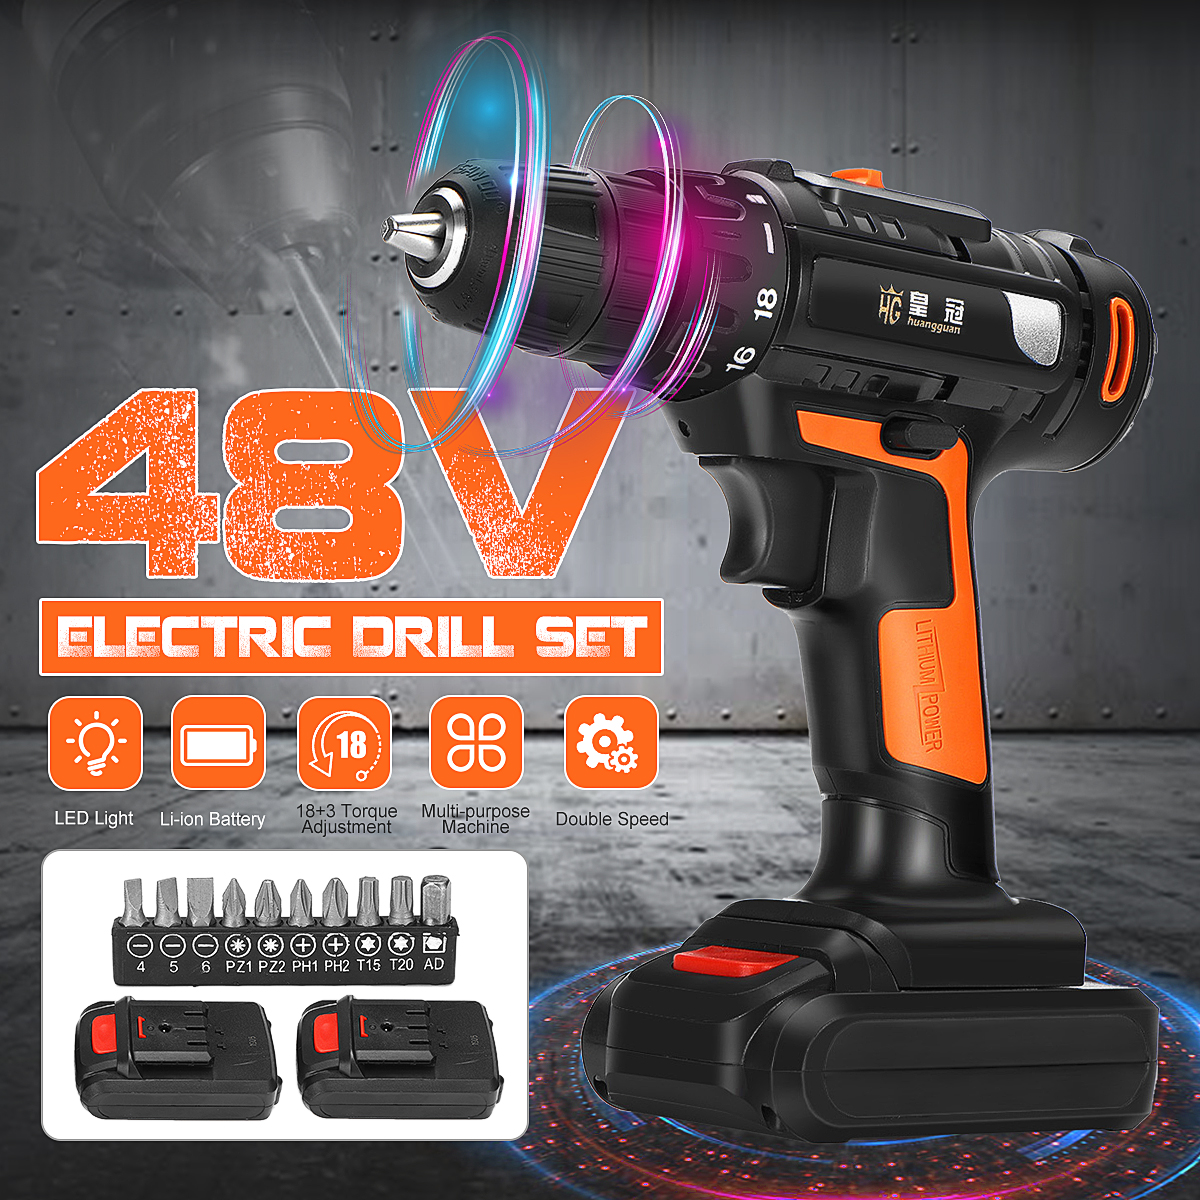 48V-Electric-Drill-Cordless-Rechargeable-Screwdriver-Drill-Screw-Set-Repair-Tools-Kit-1501700-1